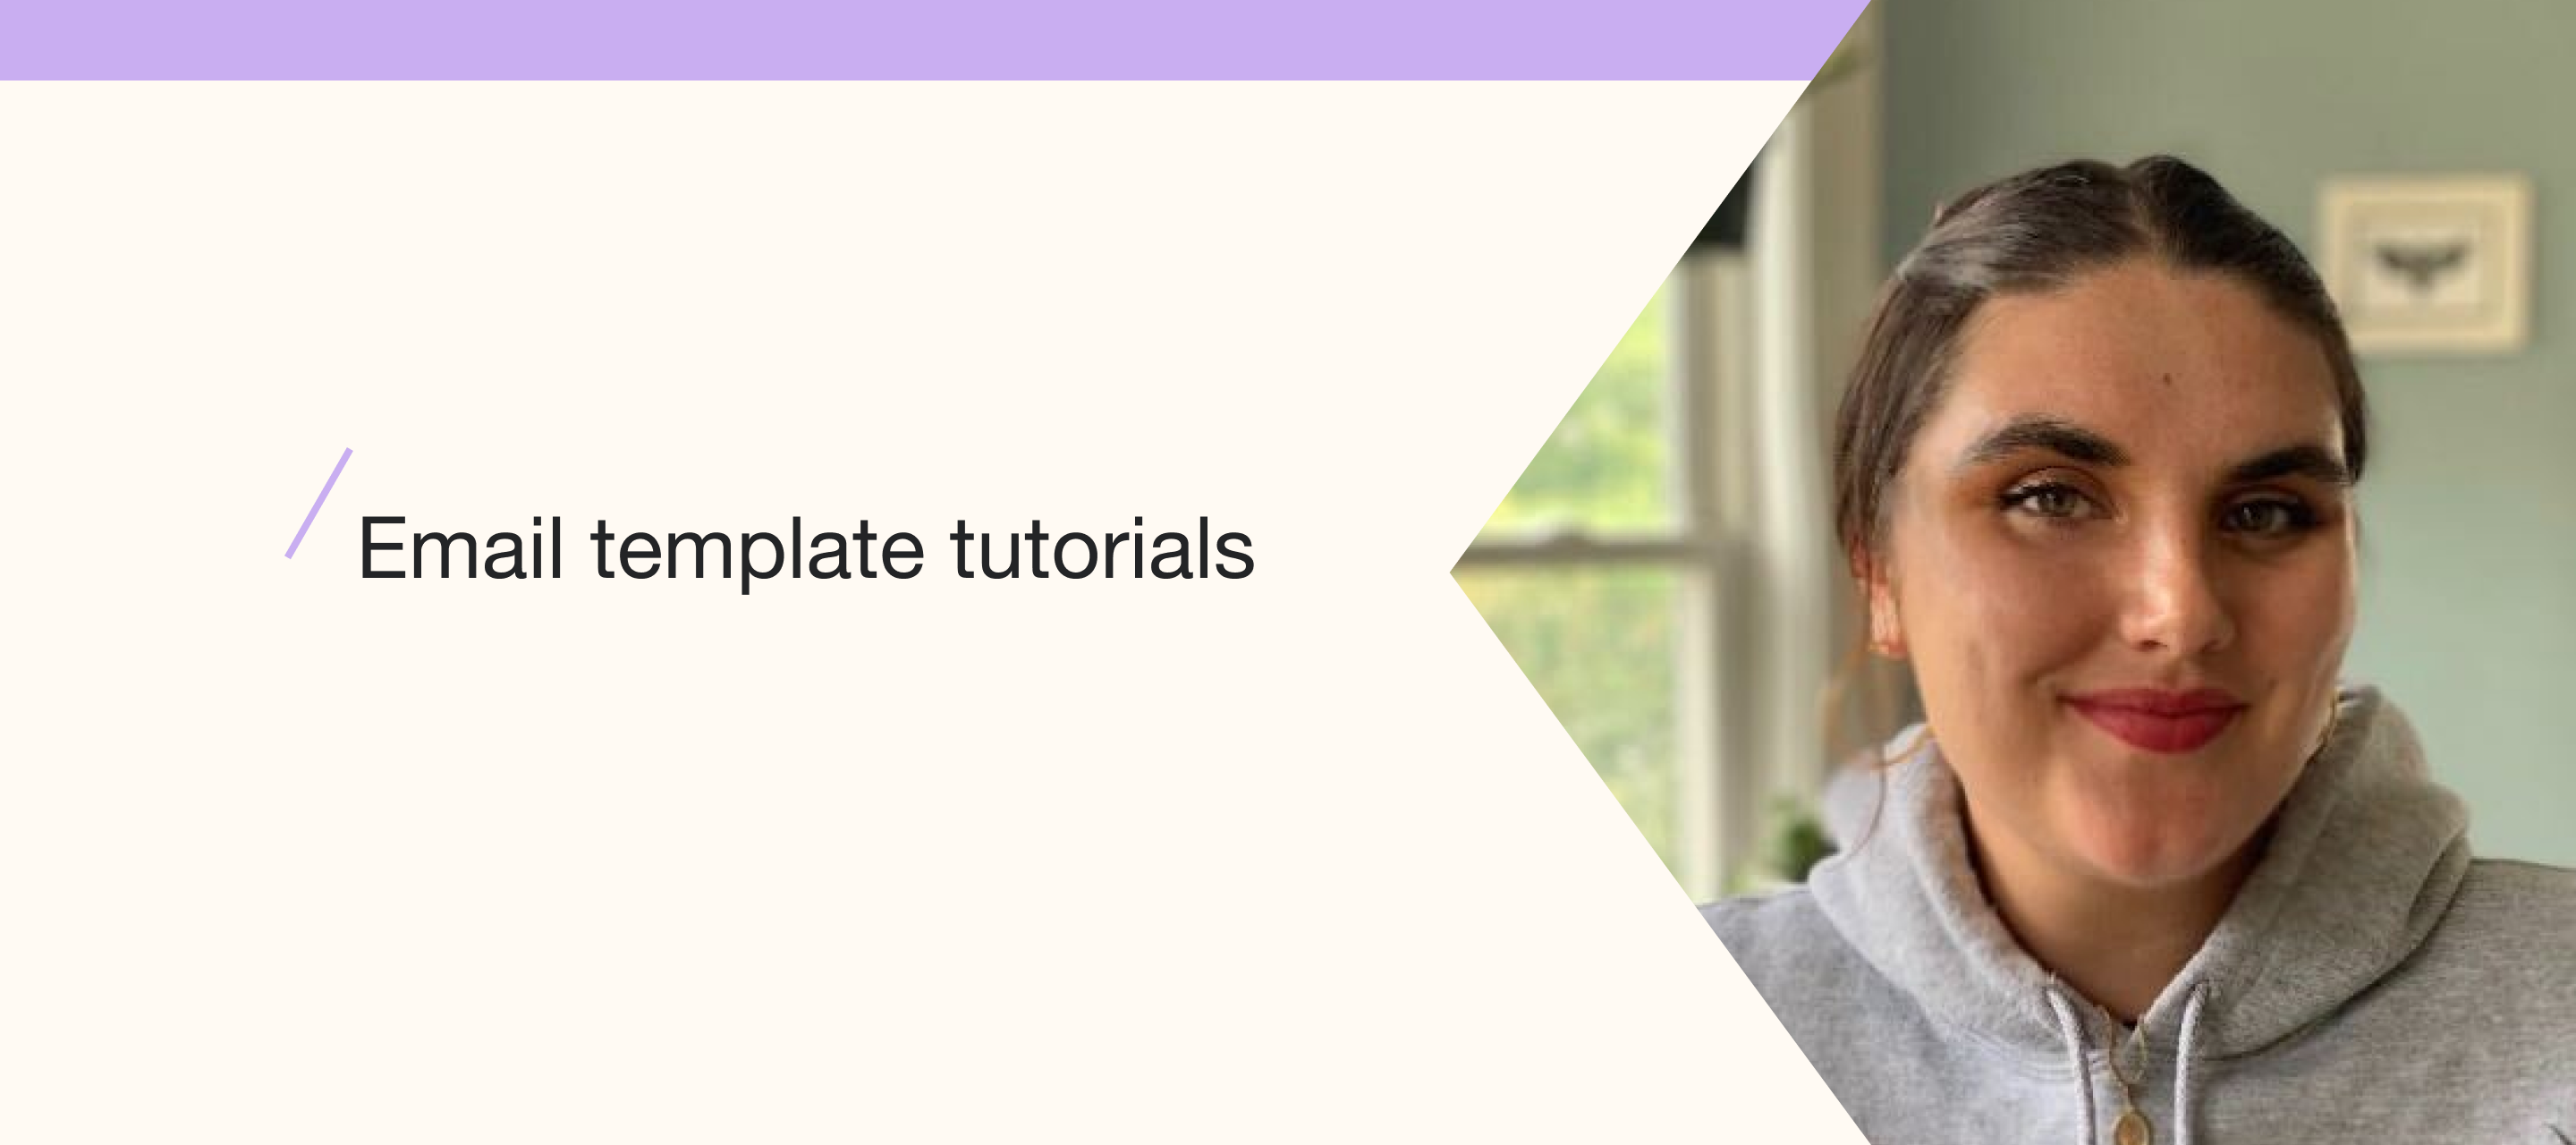 Email template tutorials by Anna McCarthy